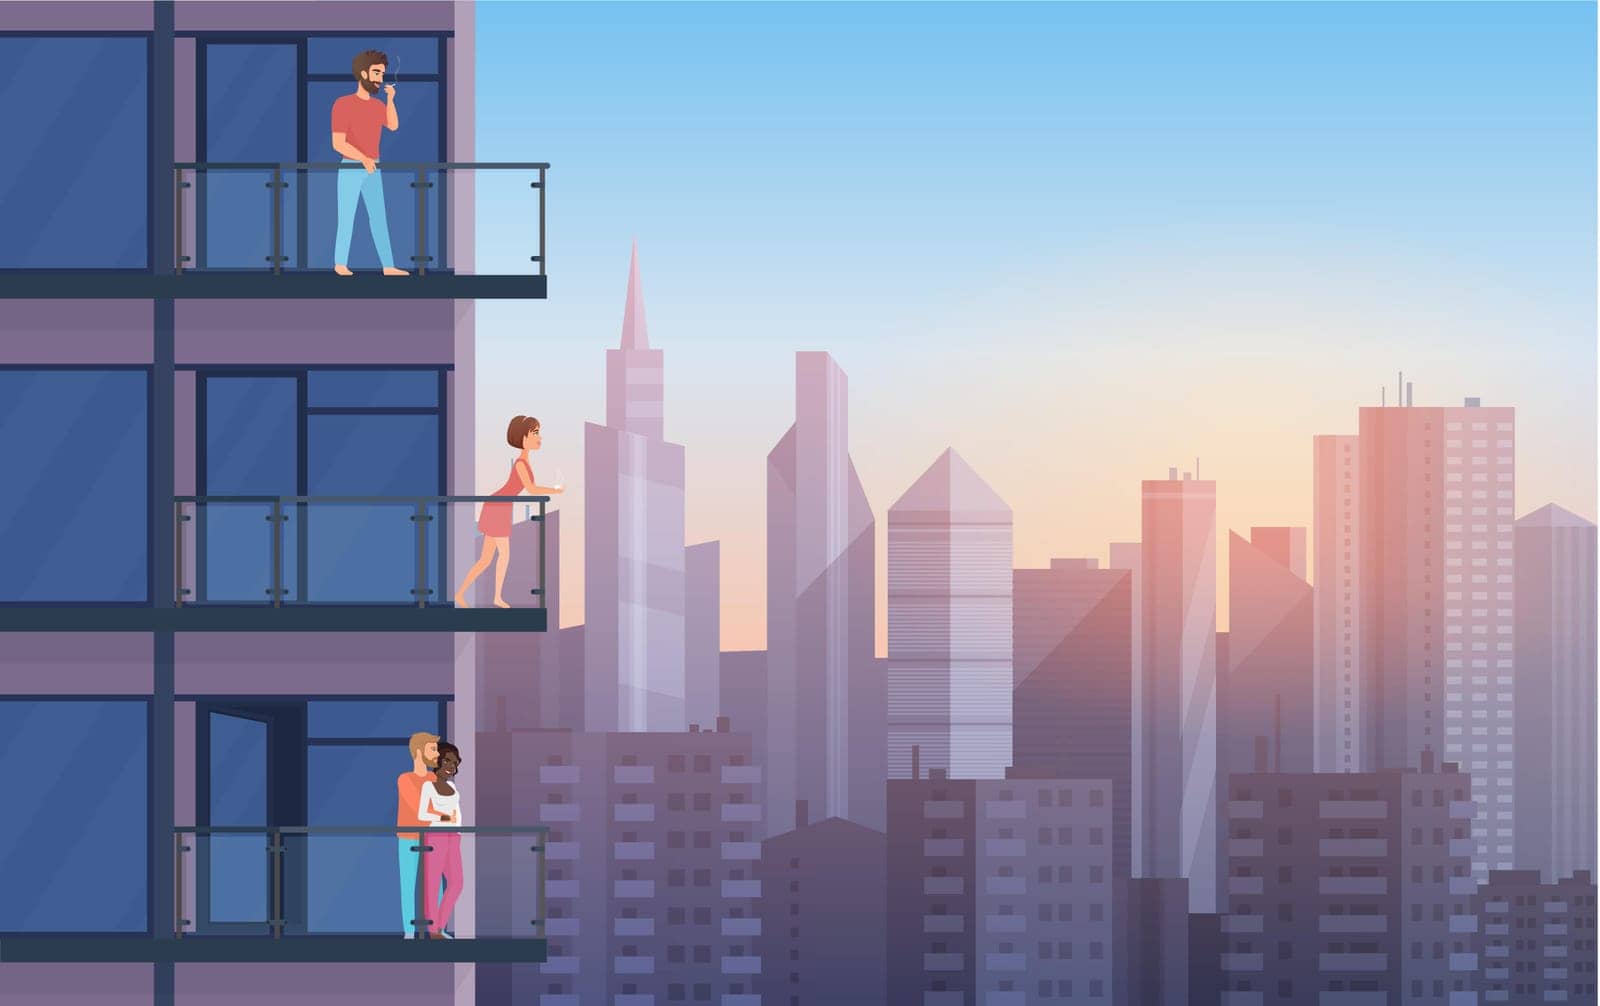 Apartment Balcony in modern house with resting people in sunset. Urban sityscape skyscrapers background cartoon vector illustration. by Lembergvector